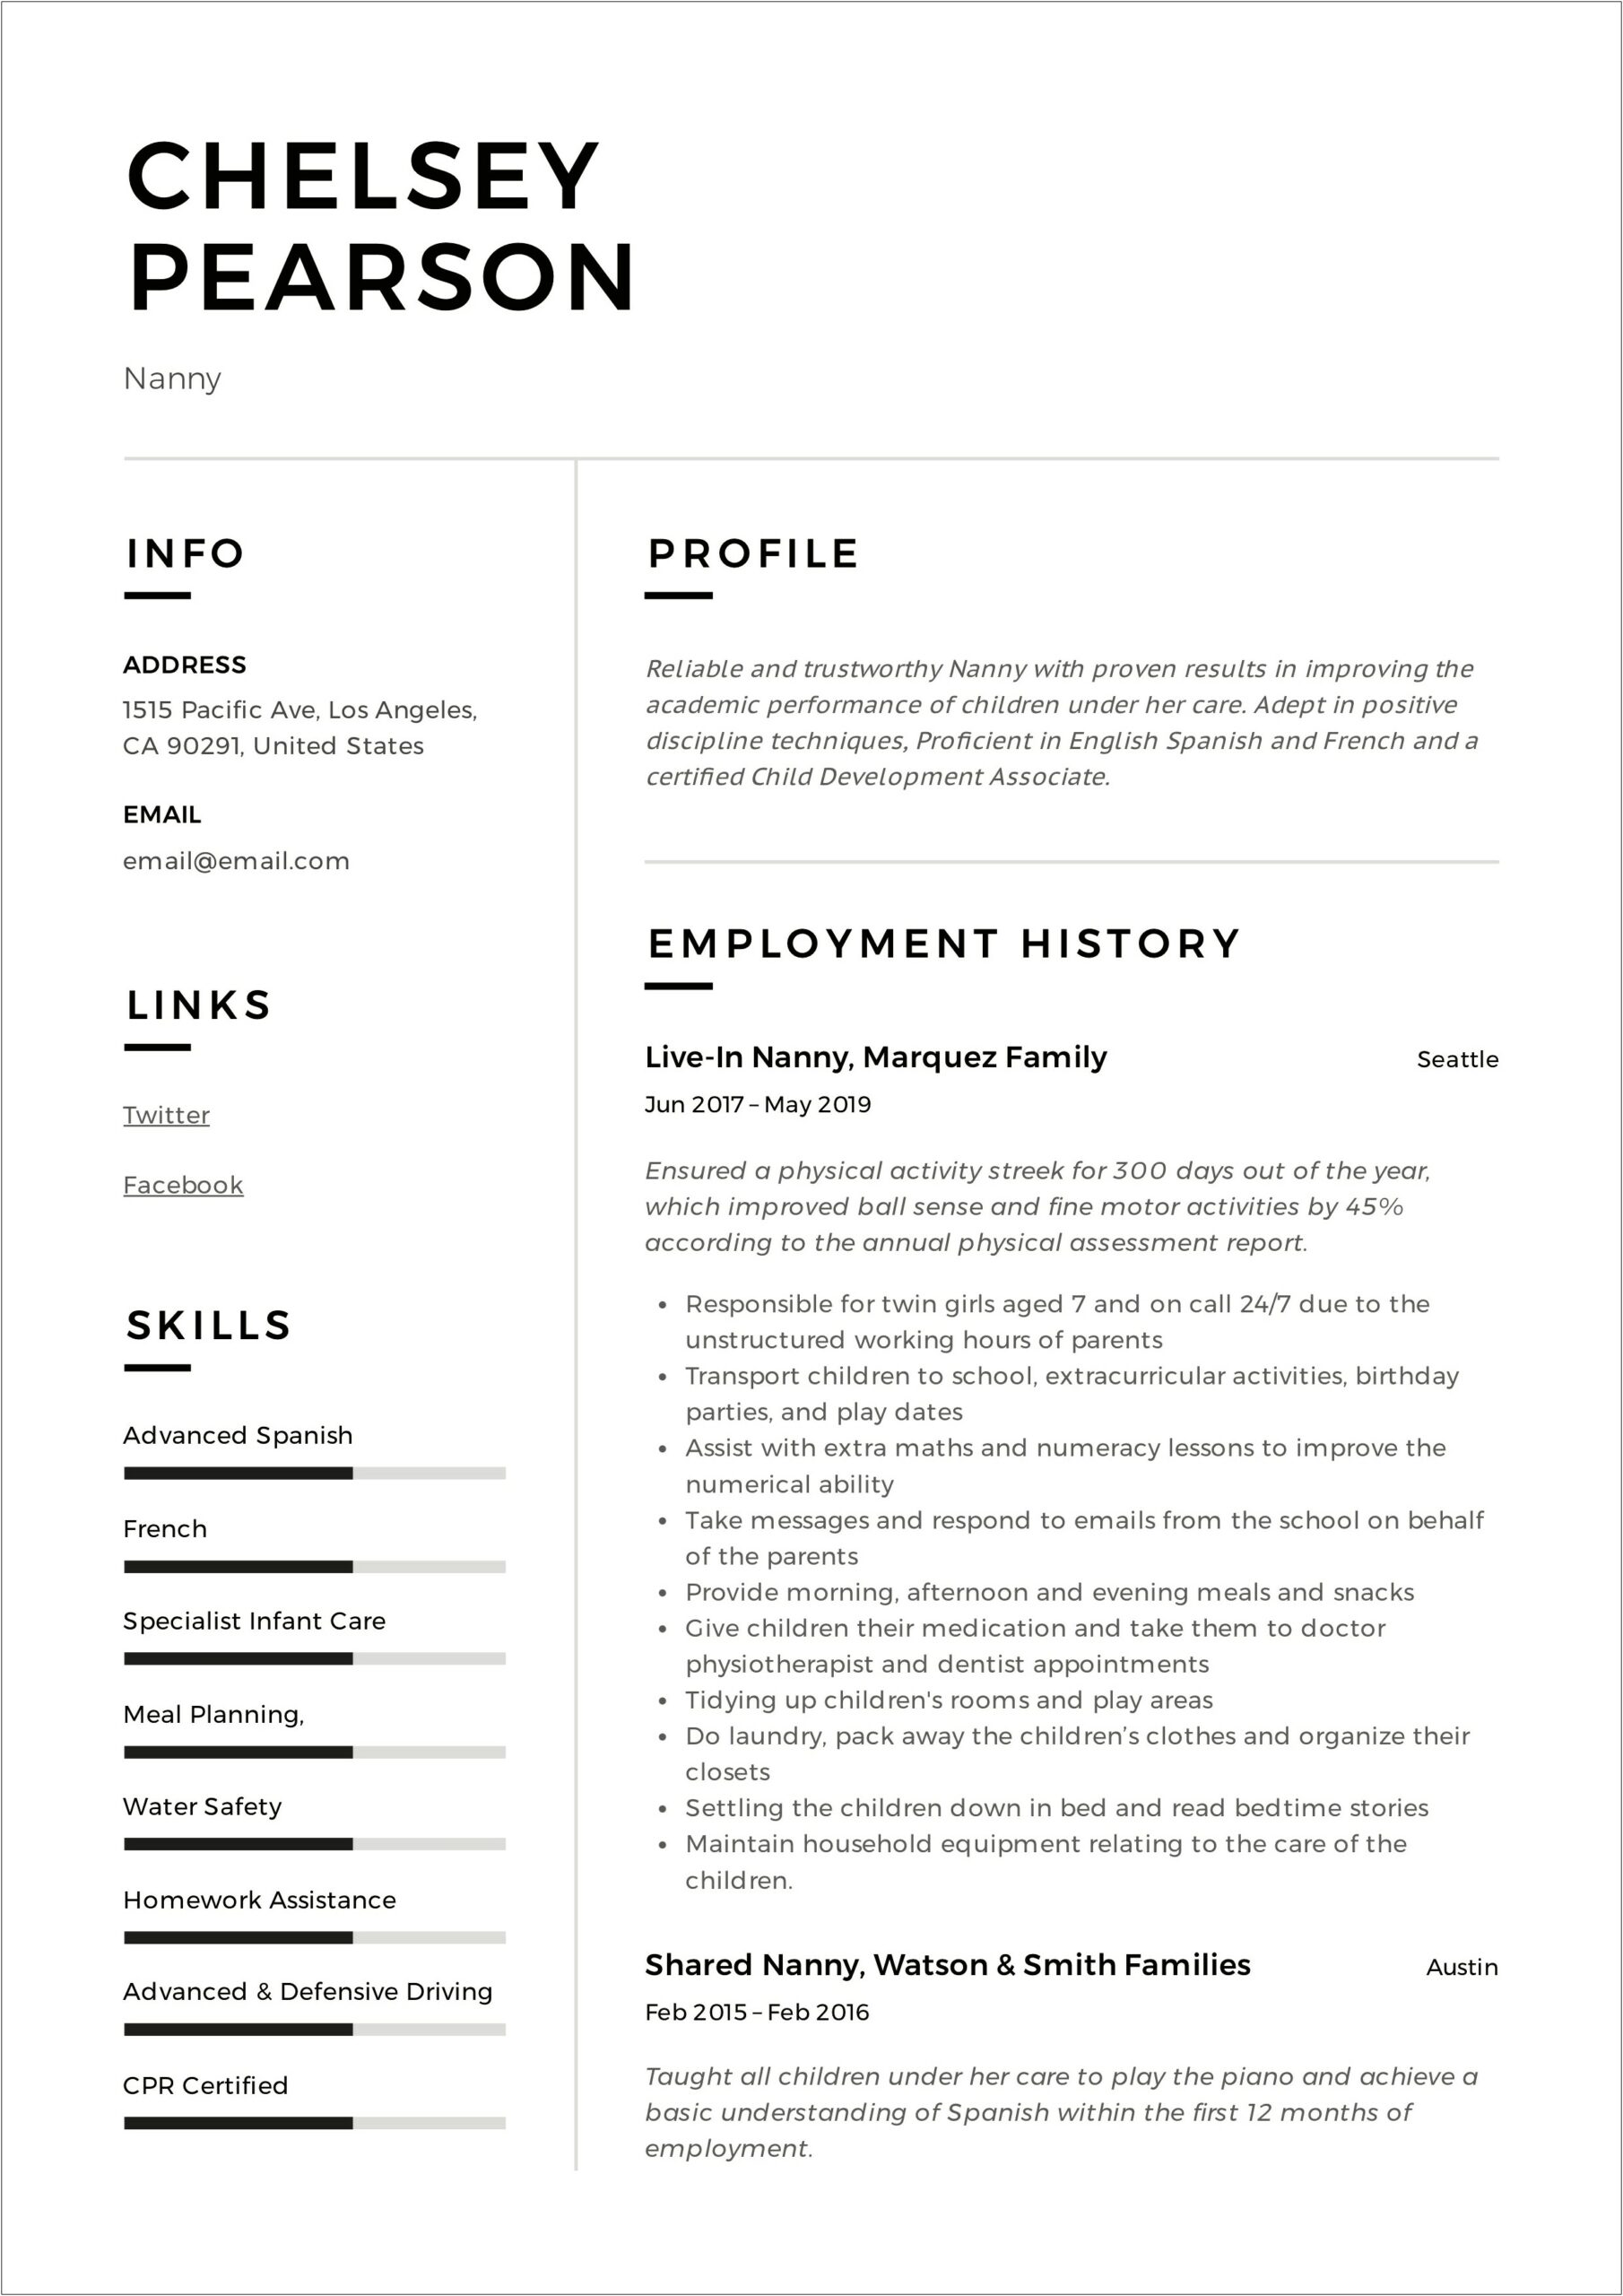 Listing Nannying As Experience On Resume